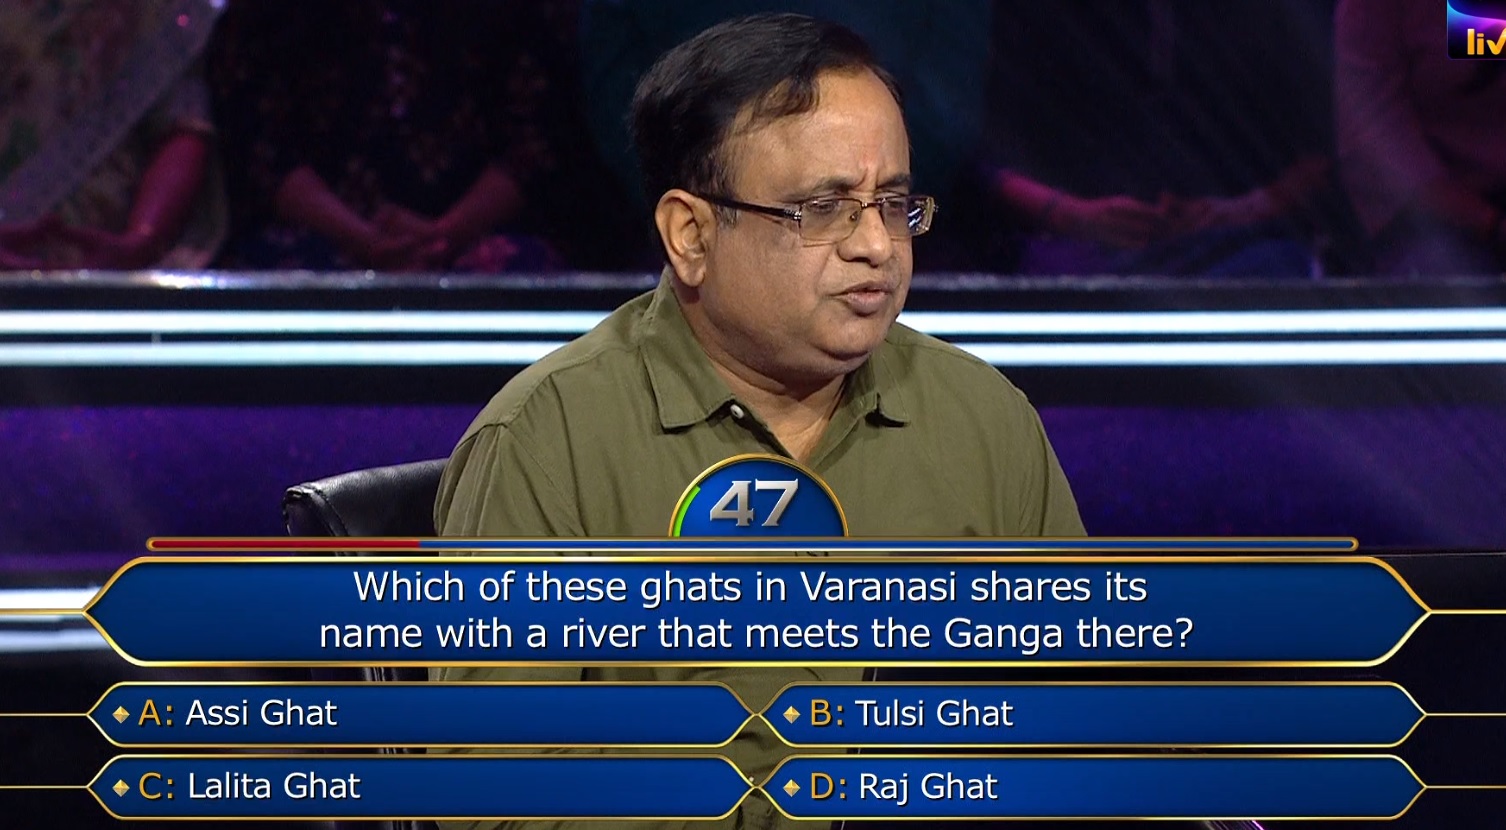 Ques : Which of these ghats in Varanasi shares its name with a river that meets the Ganga there?